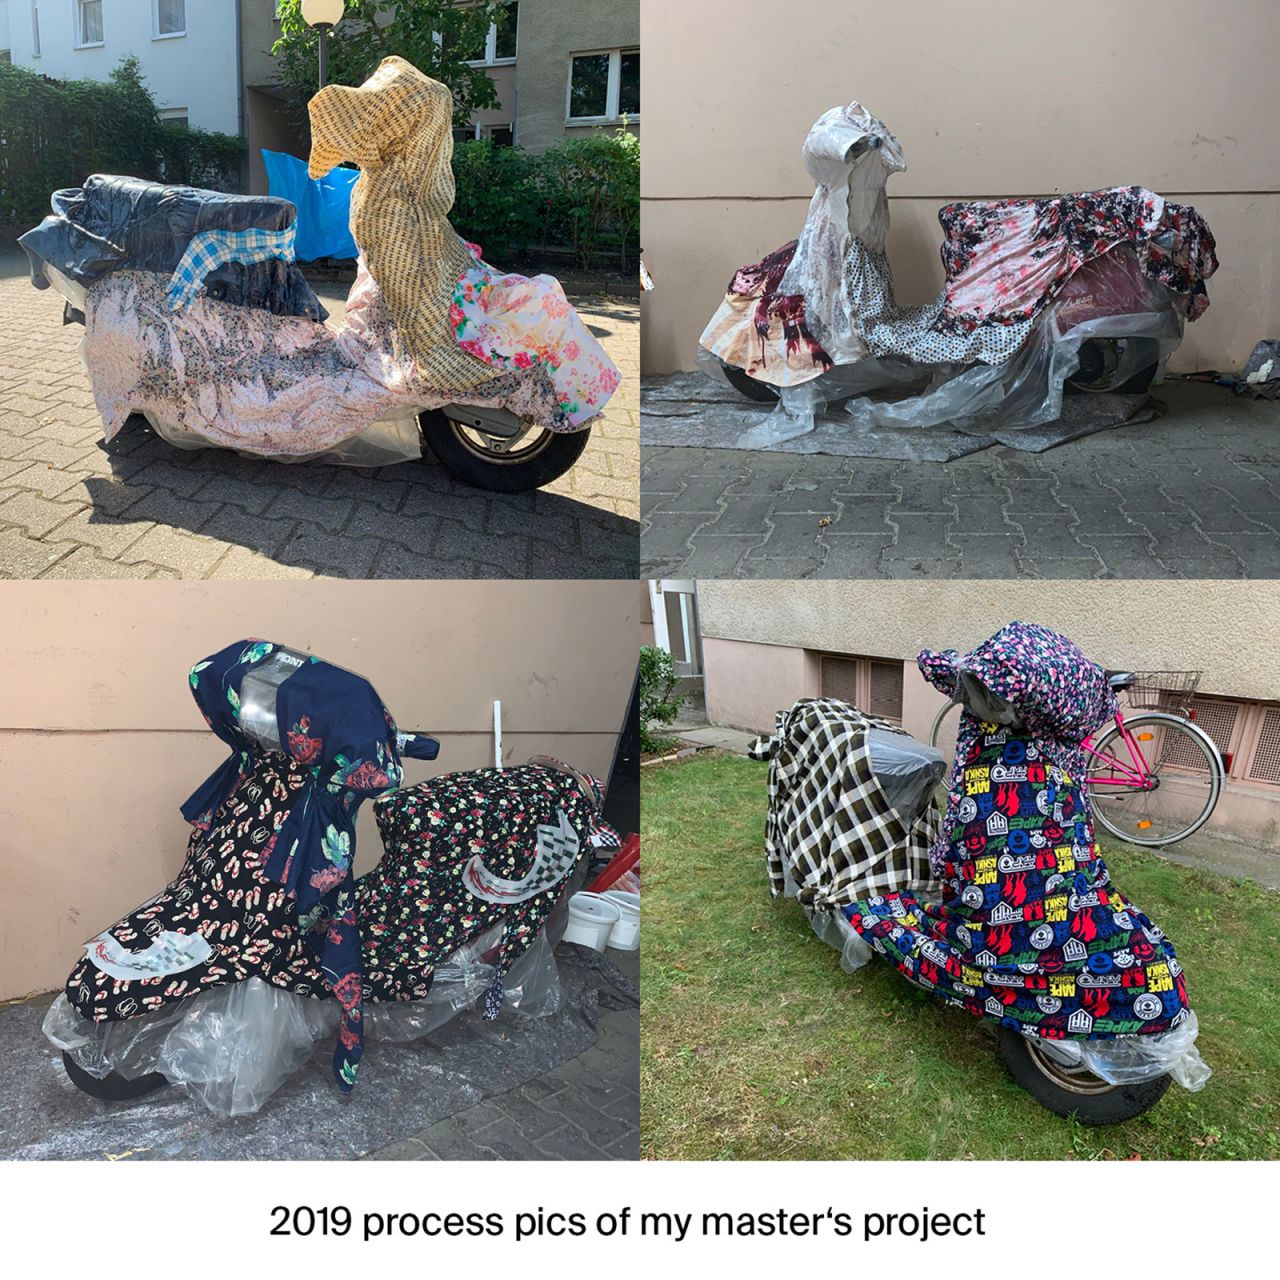 Process shots from Nguyen's master's project show motorbikes draped in garments. Below, Balenciaga's contested Instagram post shows a motorbike being wrapped in the label's clothing.